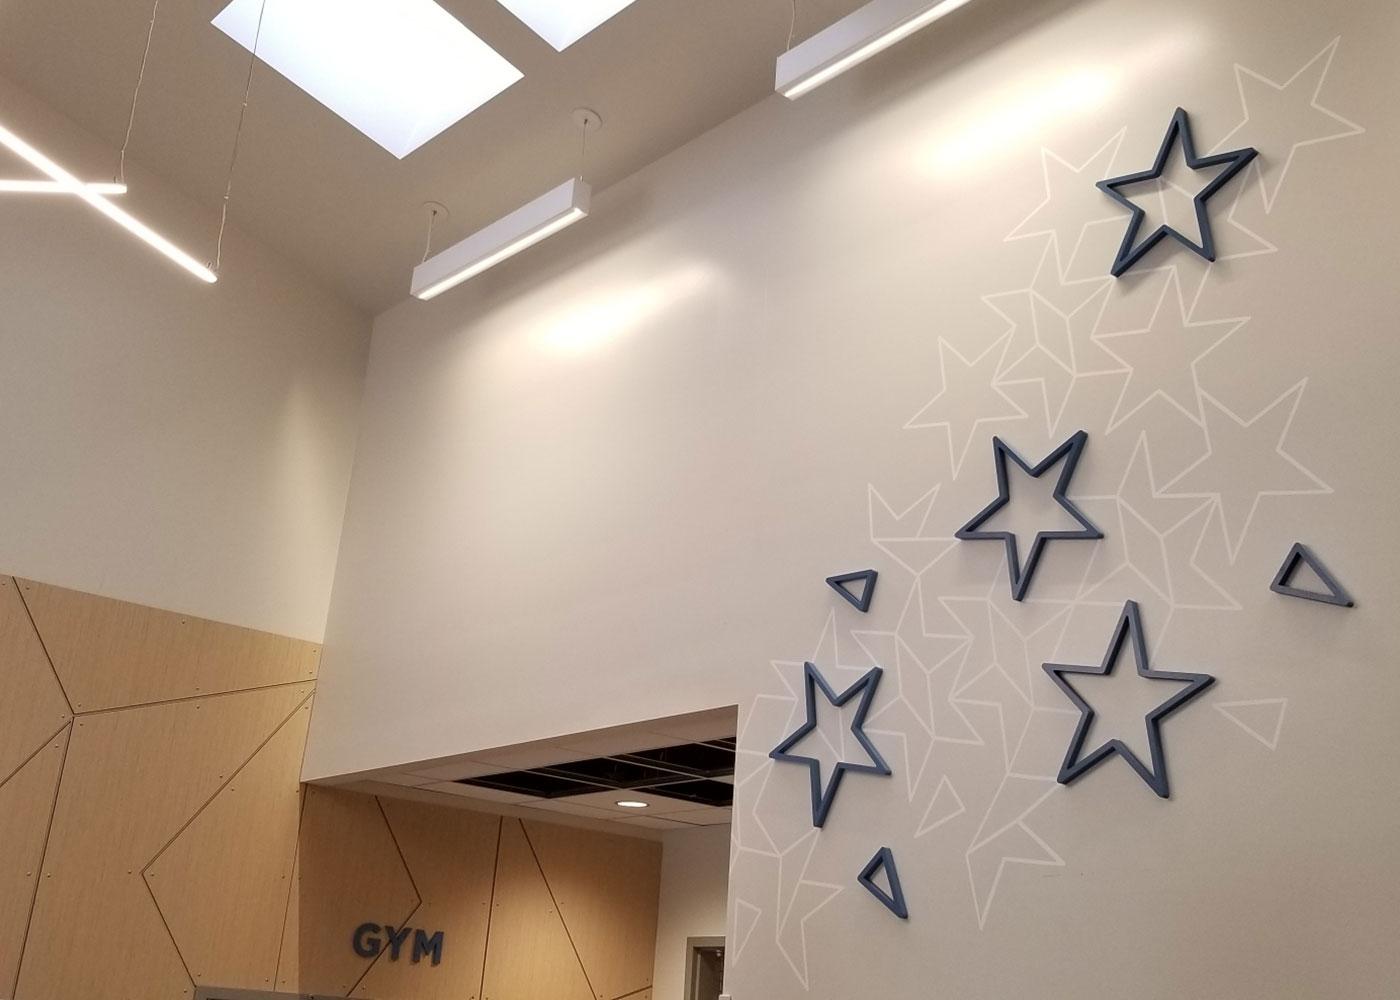 Custom signs and decorative architecture panels were produced as part of the new interior sign package at Centennial ES.